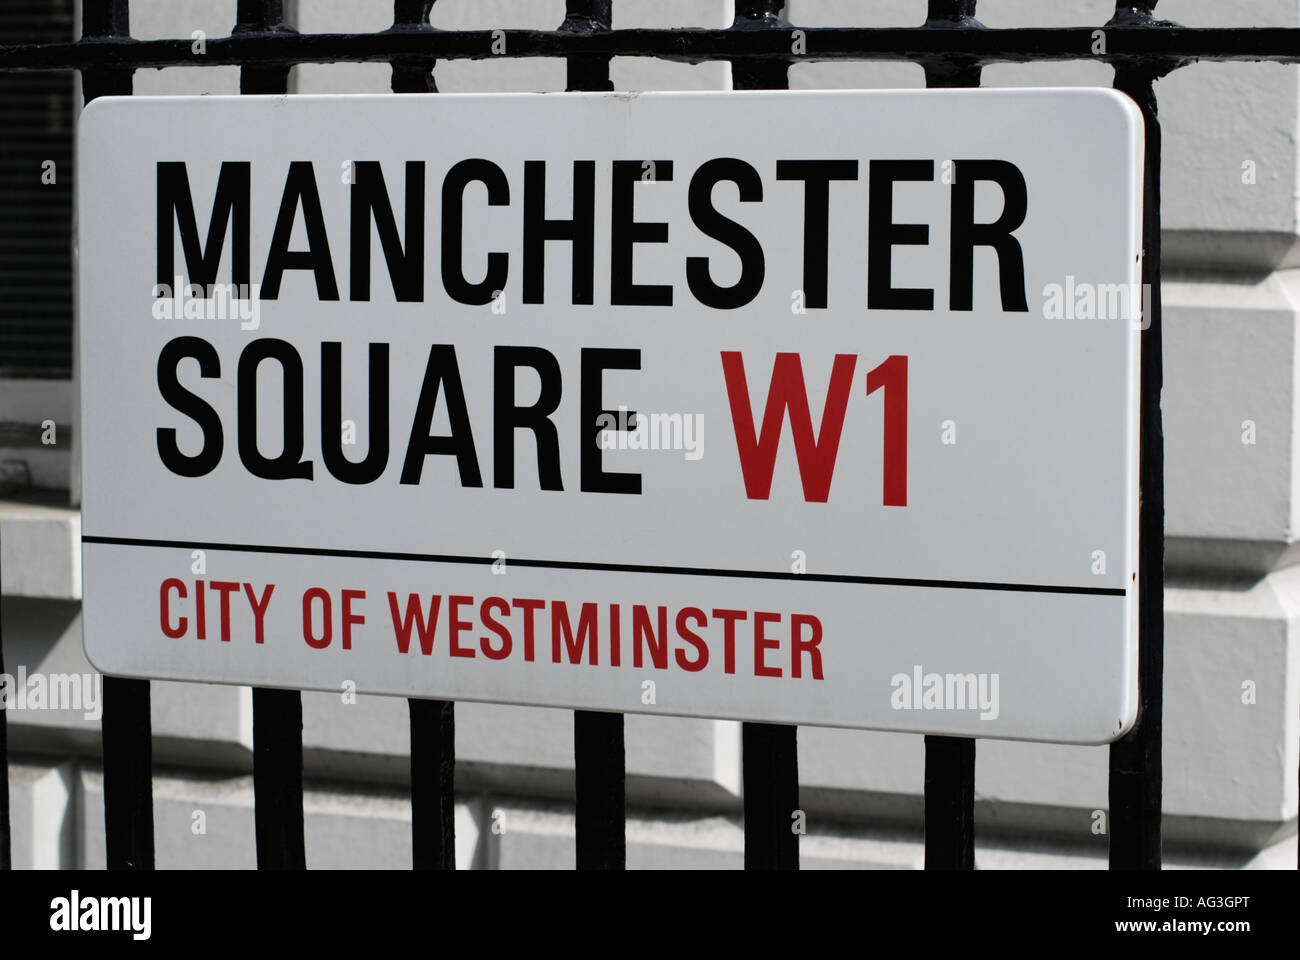 Manchester Square W1 London City of Westminster street sign on railings Stock Photo